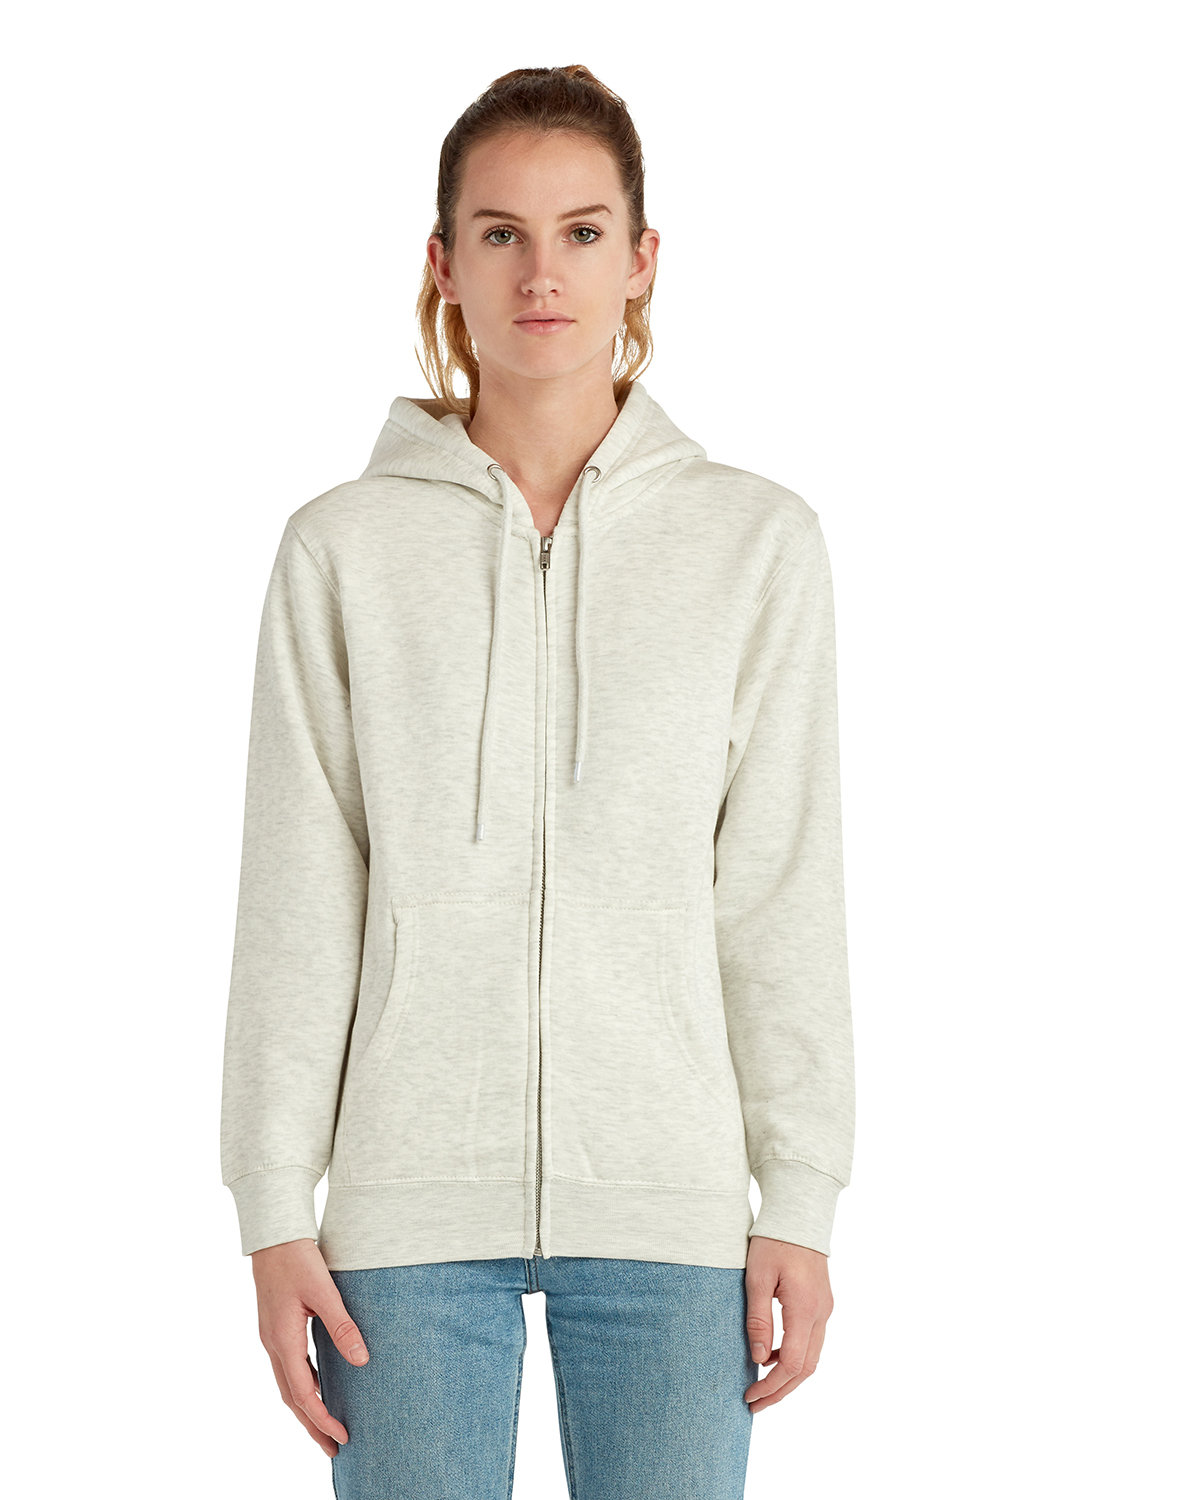 click to view OATMEAL HEATHER